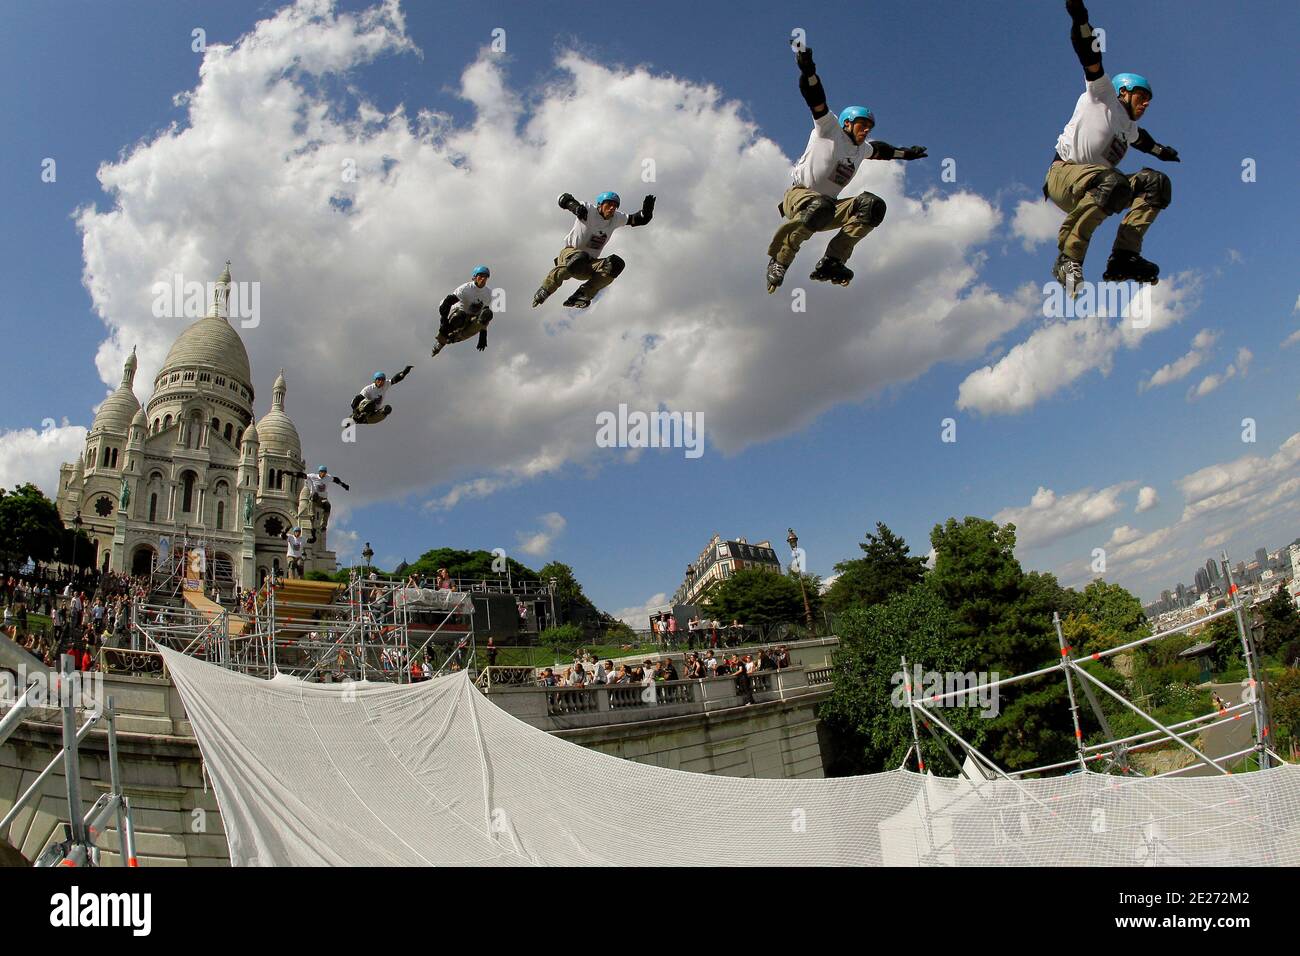 World roller champion Taig Khris during a training session at the Sacre  Coeur in Paris, France on July 1, 2011. Taig Khris will try to break the  long jump world record from